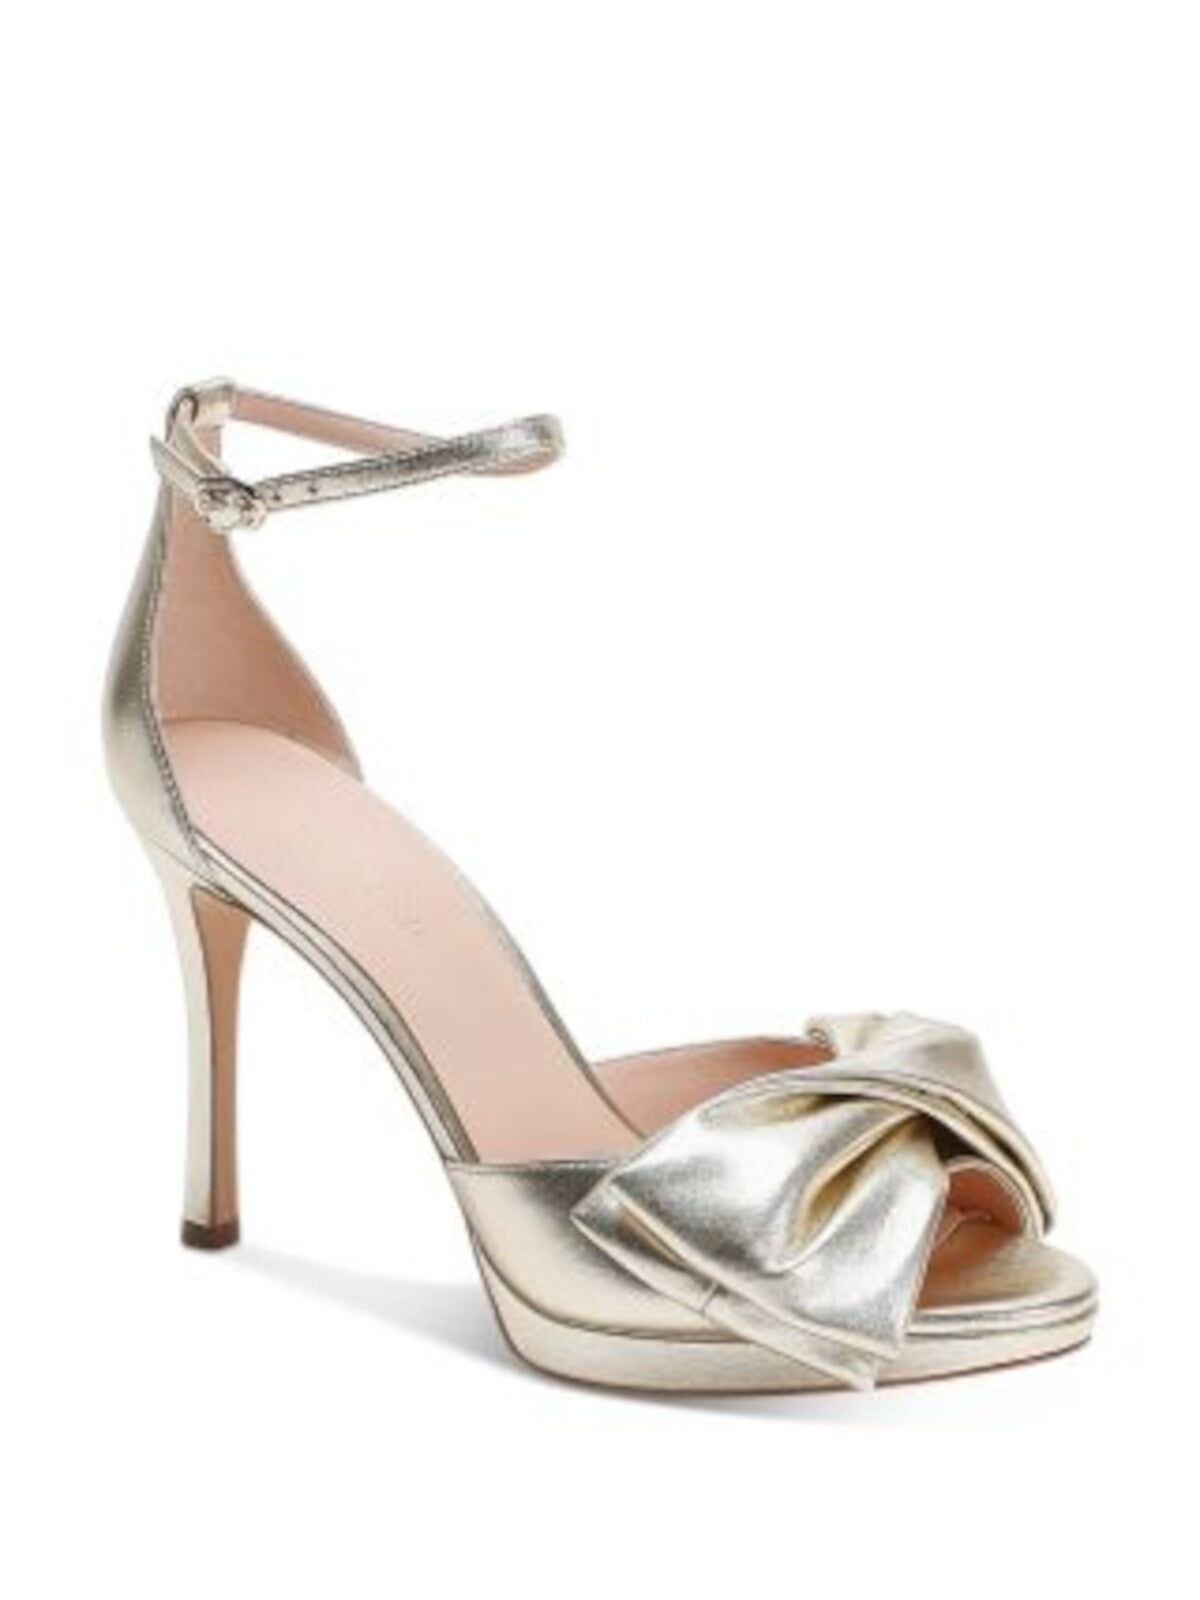 KATE SPADE NEW YORK Womens Gold Padded Ankle Strap Bow Accent Bridal Bow Round Toe Stiletto Buckle Leather Dress Heeled Sandal 5.5 B